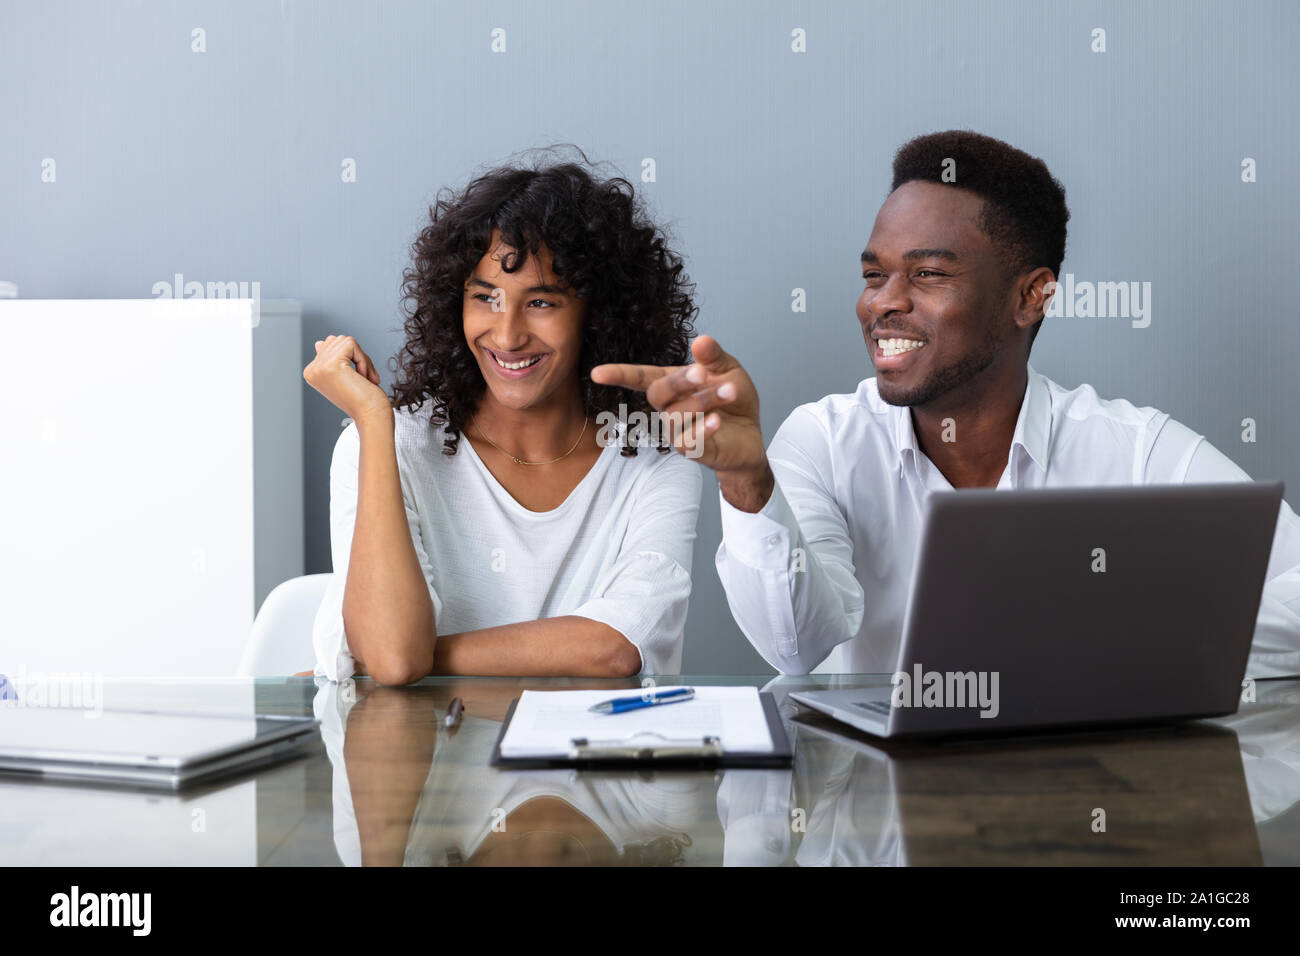 People Laughing About Their Coworker In Office Stock Photo